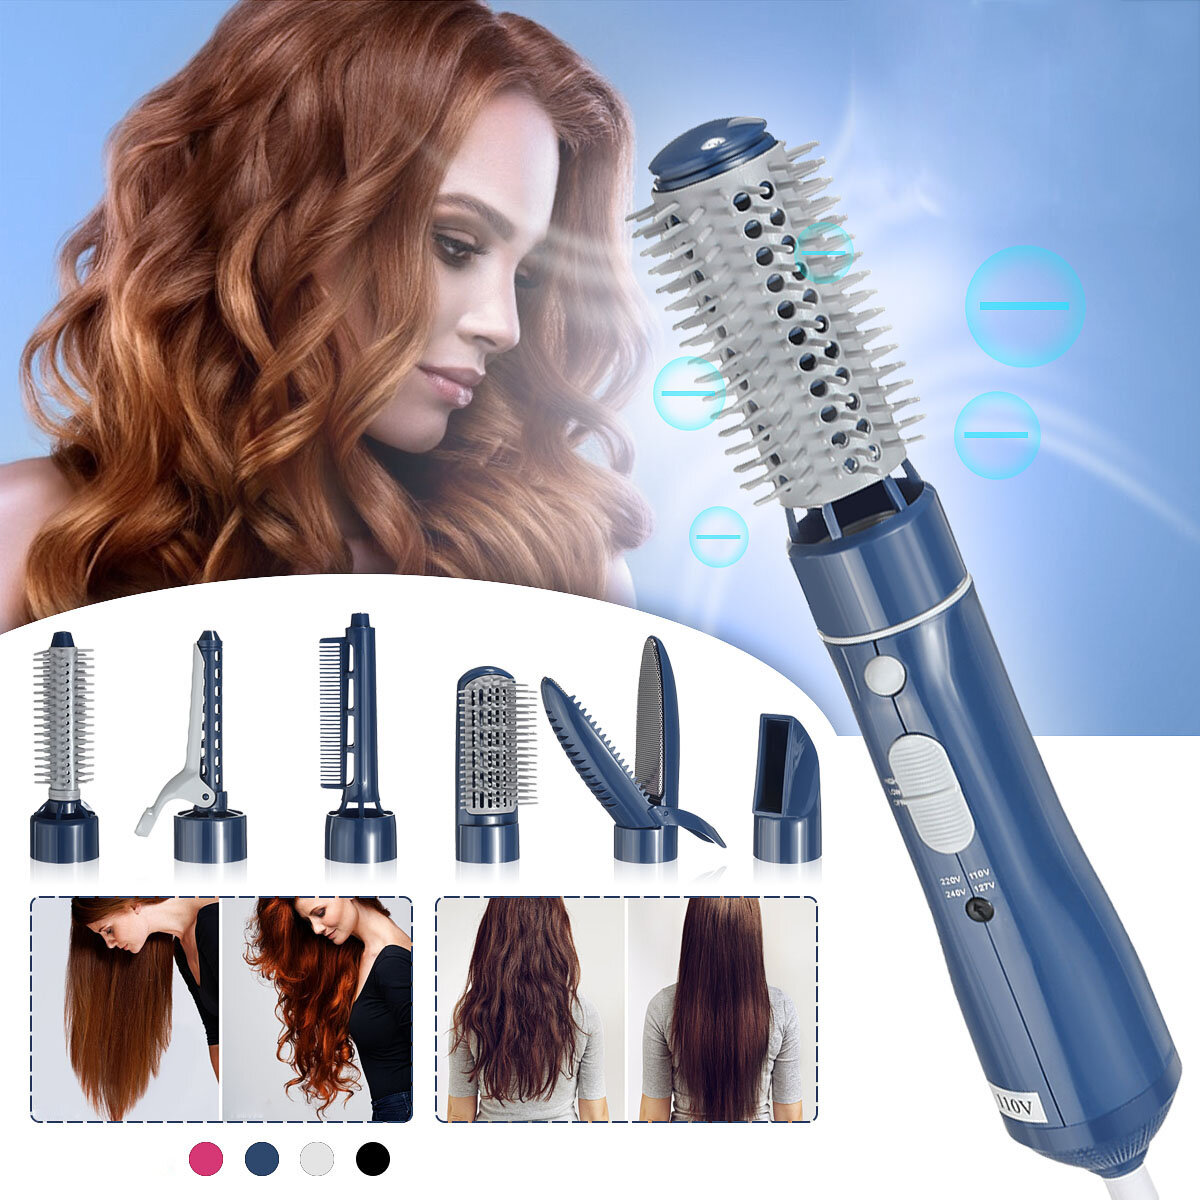 7 in 1 Multifunctional Electric Hair Dryer Styling Set 2 Heating Setting Variable Heat Control Hair 